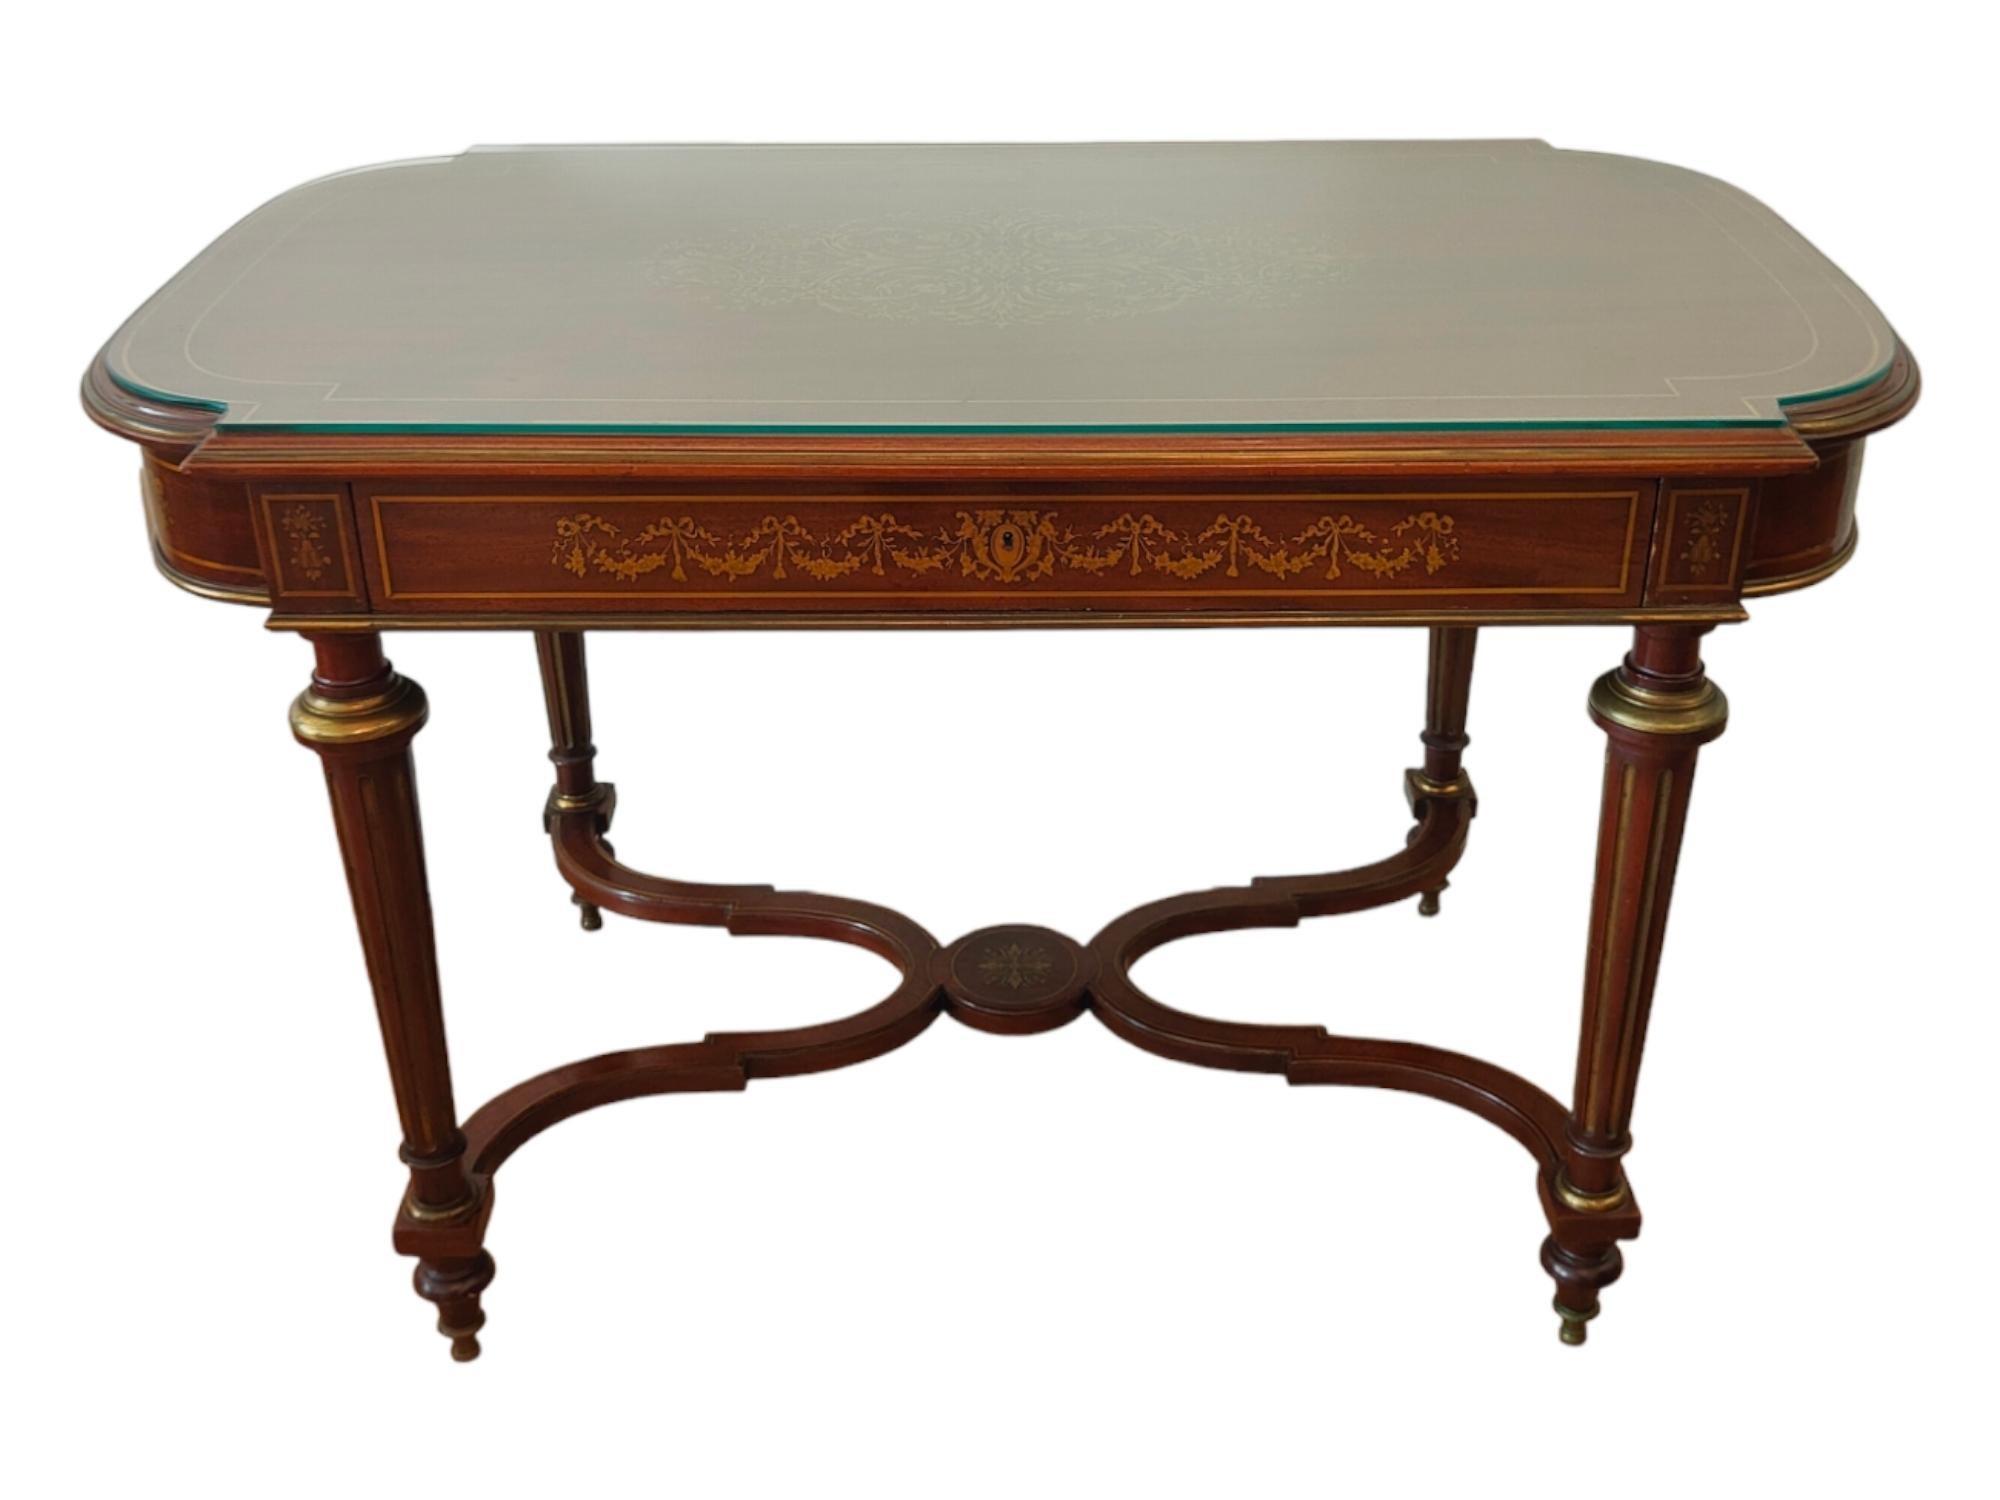 Elegant French table from the 19th Century
Very nice 19th Century table with boulle brass marquetry on the top and the structure. it has a central drawer. excellent condition. Measures: 120x70x77.